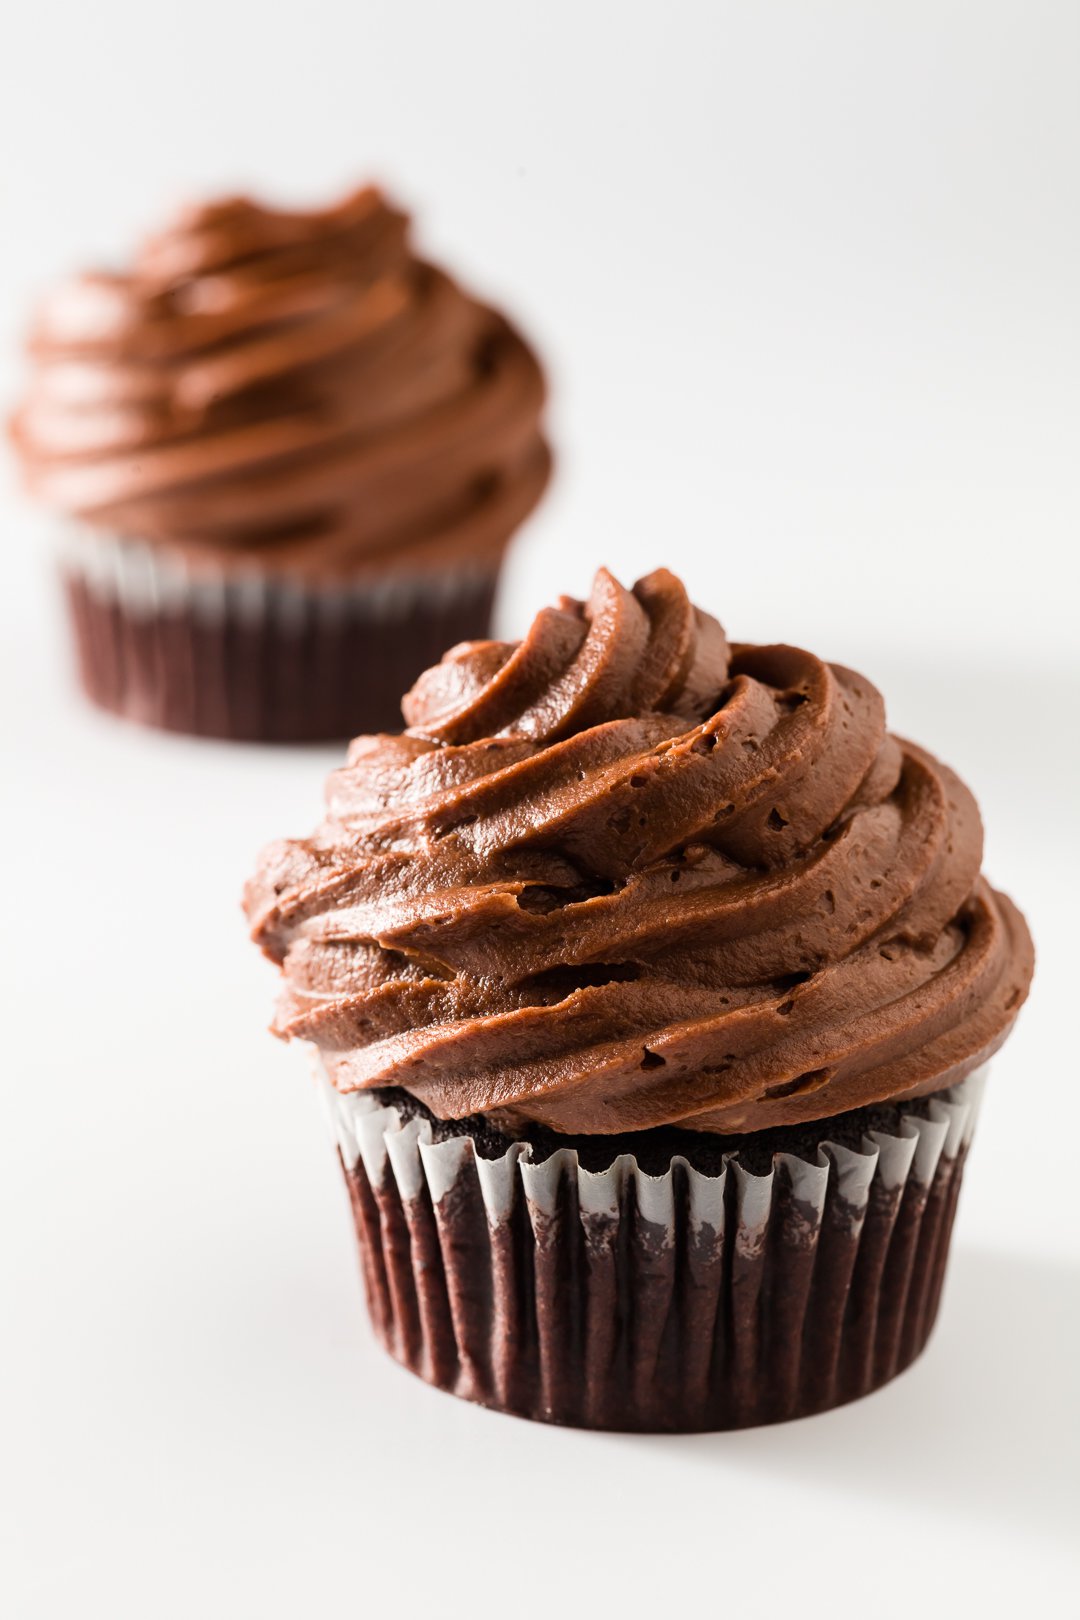 The Best Chocolate Cupcakes Decadent Moist And Easy To Bake